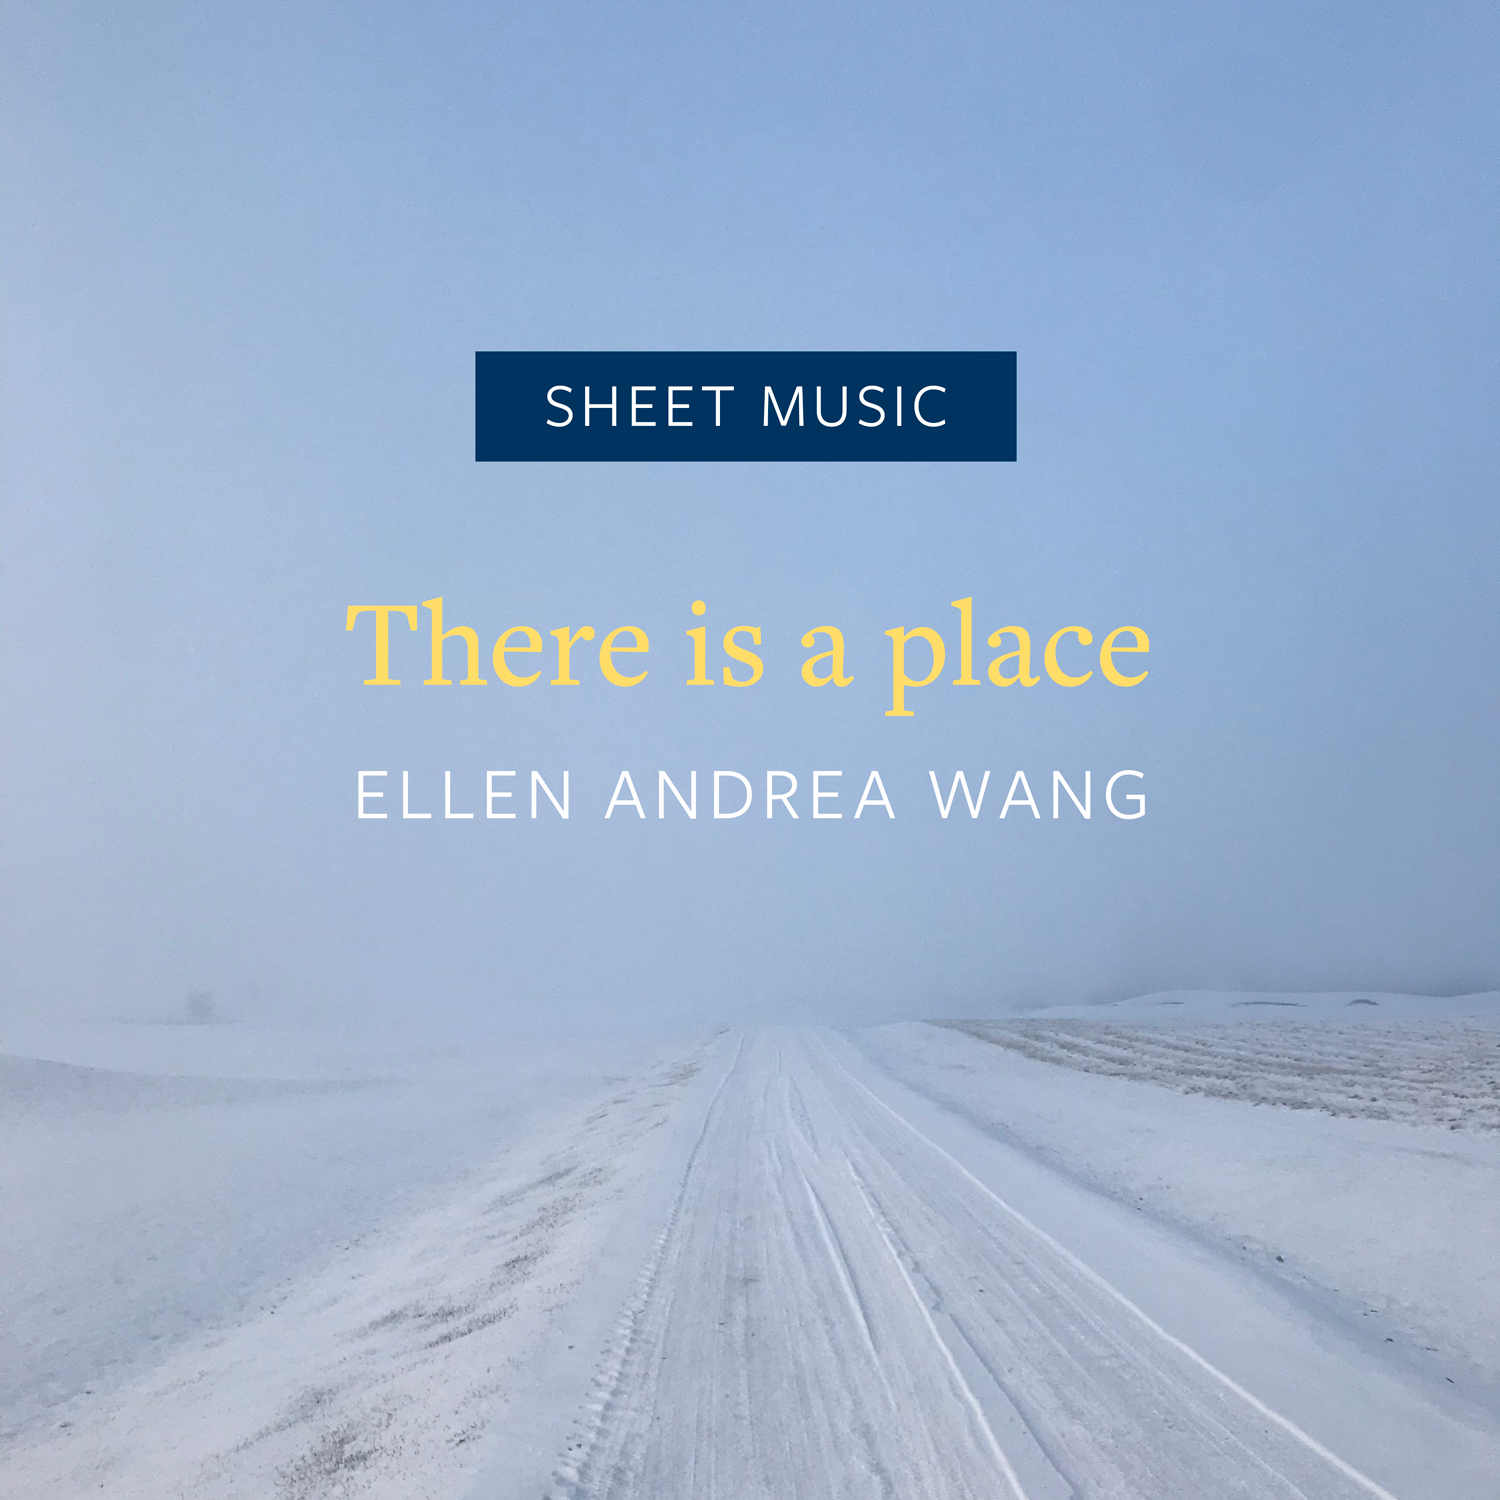 There is a place – Note